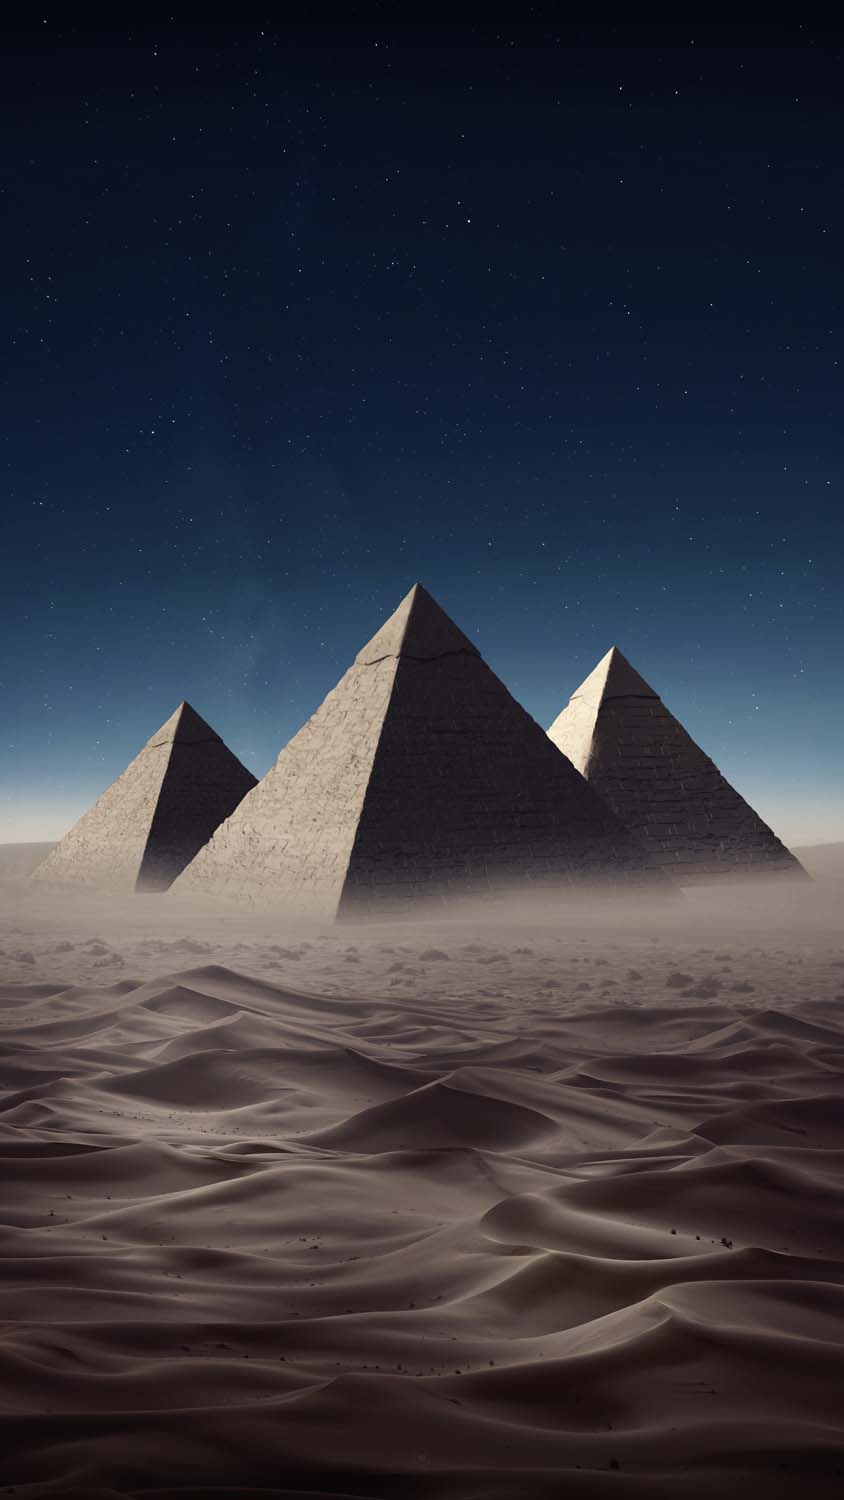 Pyramids IPhone Wallpaper HD - IPhone Wallpapers : iPhone Wallpapers